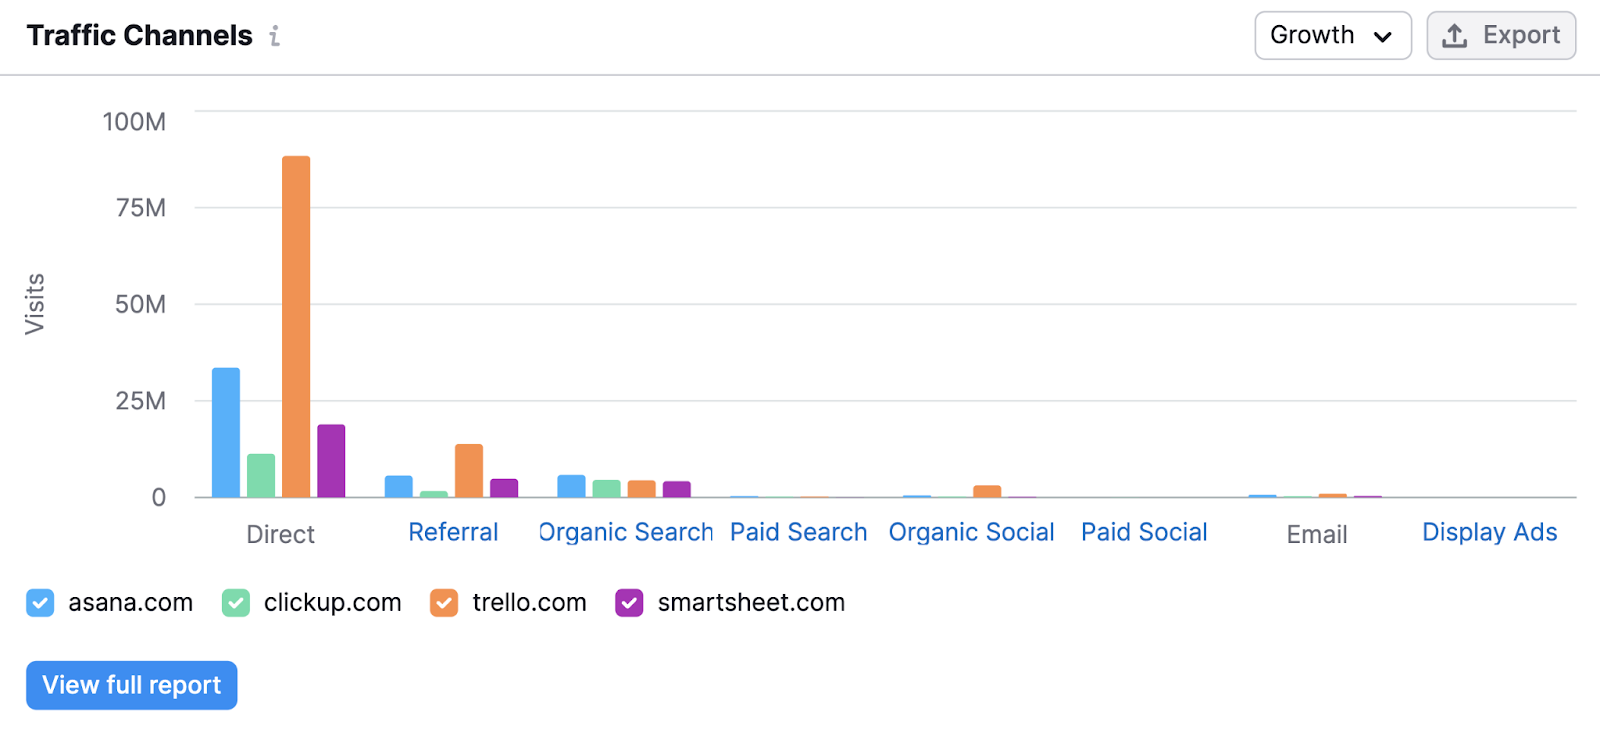 A breakdown of traffic channels for Asana, ClickUp, Trello, and Smartsheet in Traffic Analytics tool